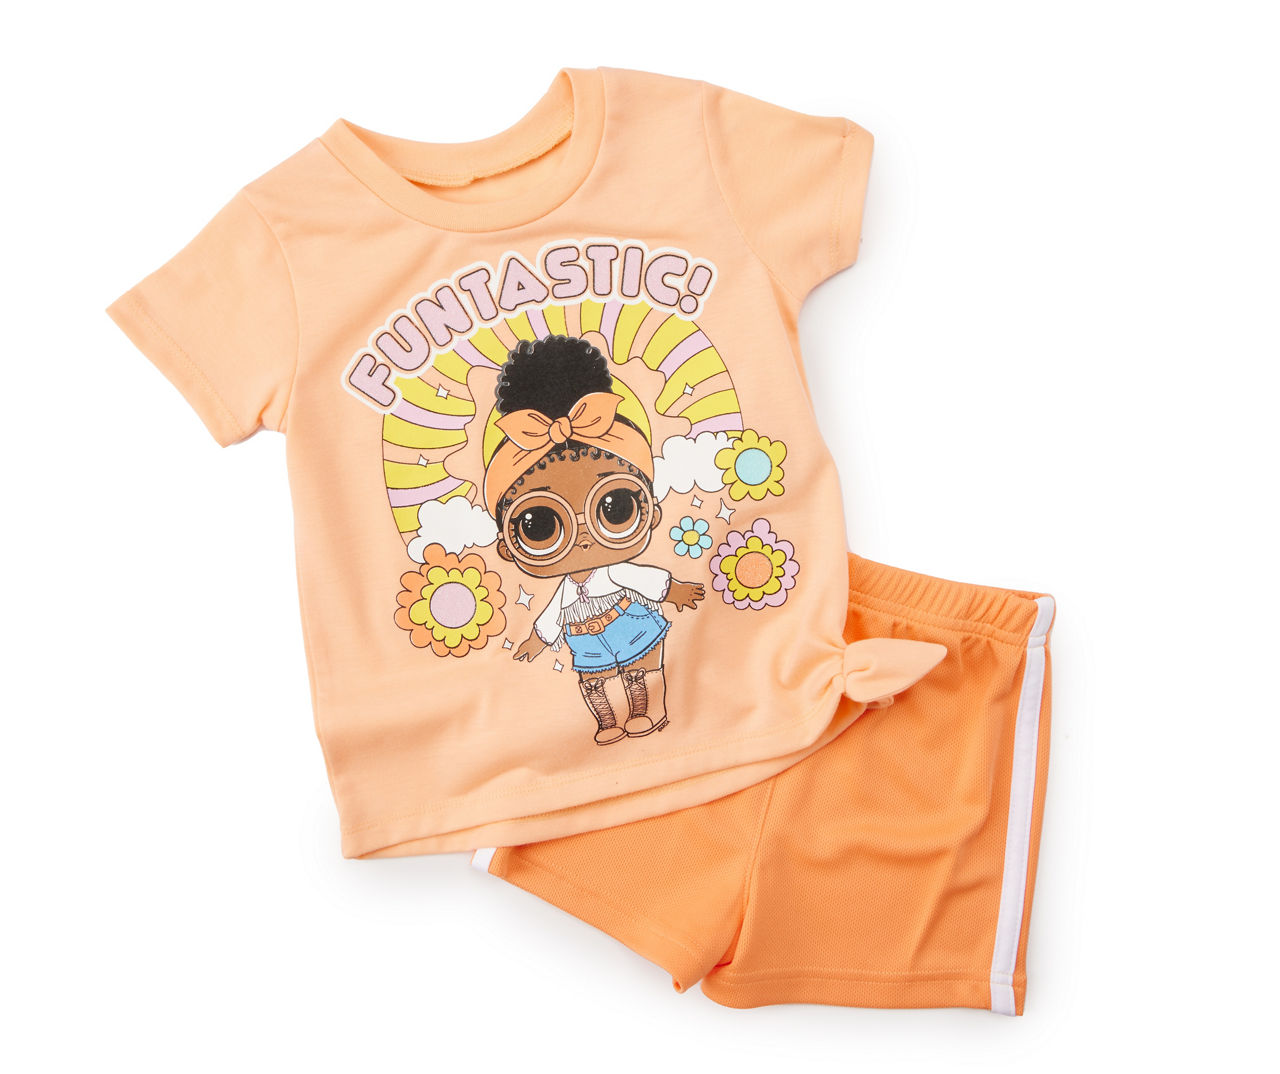 Toddler Size 4T "Funtastic" Orange Floral Side-Tie Tee & Shorts